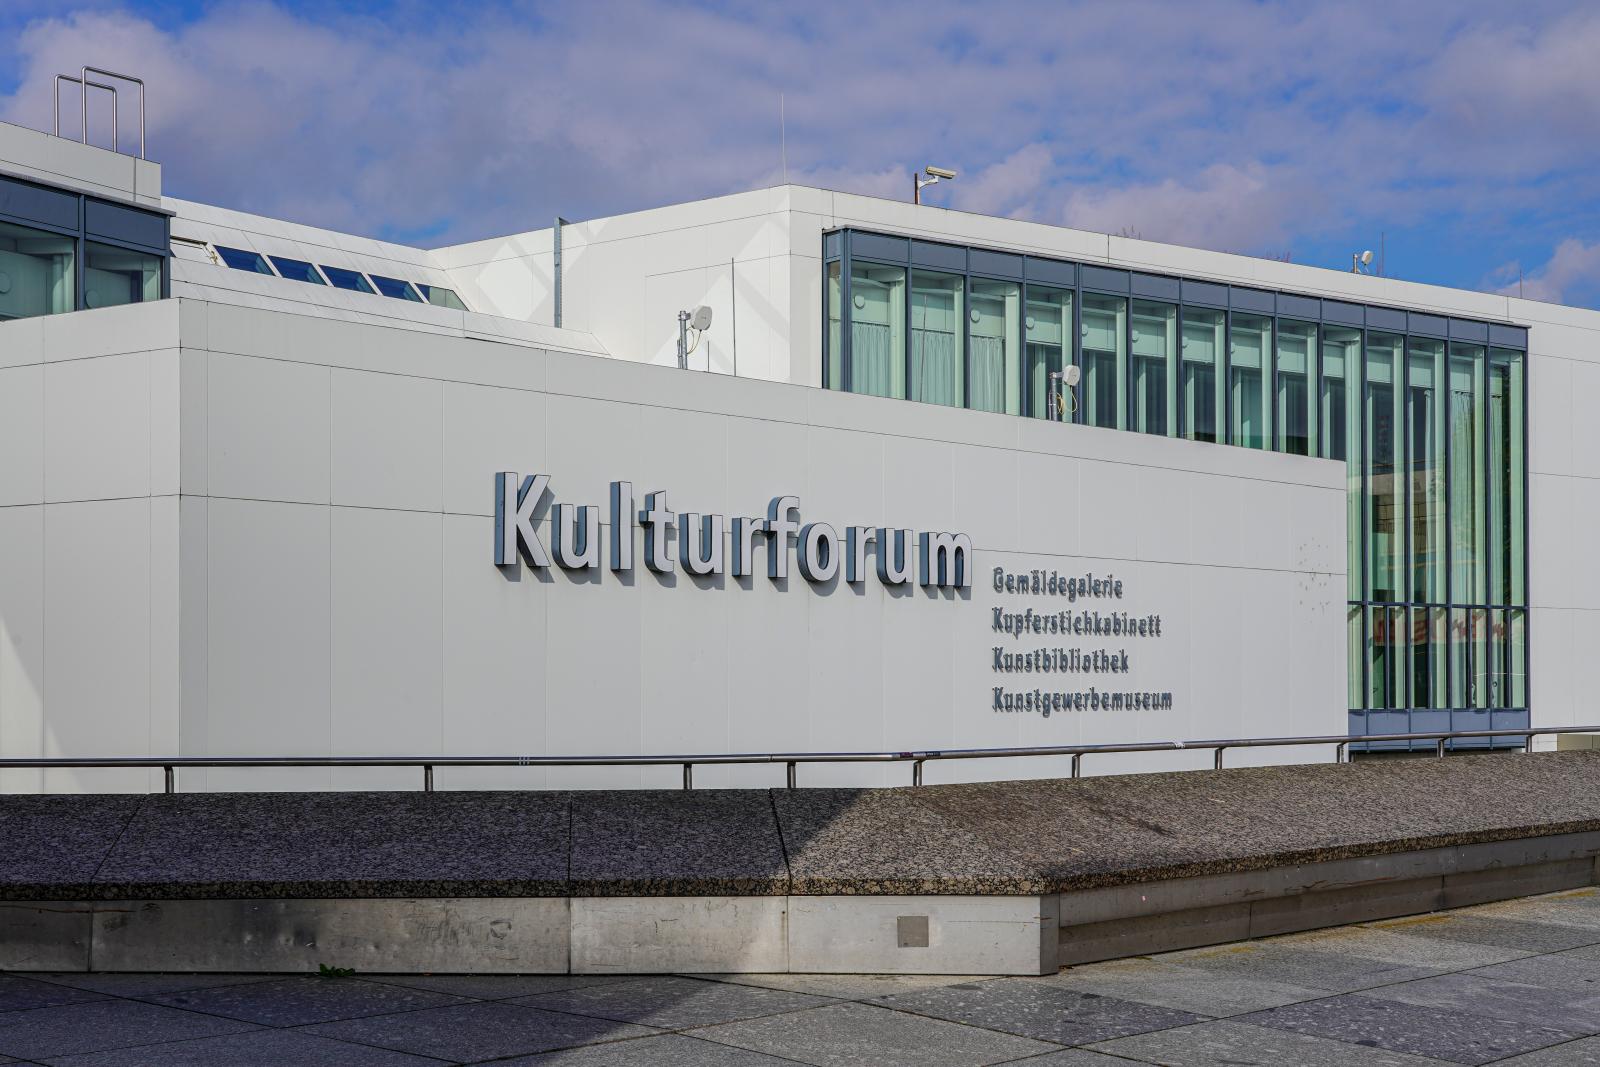 At the Main Entrance to the Kulturforum Berlin